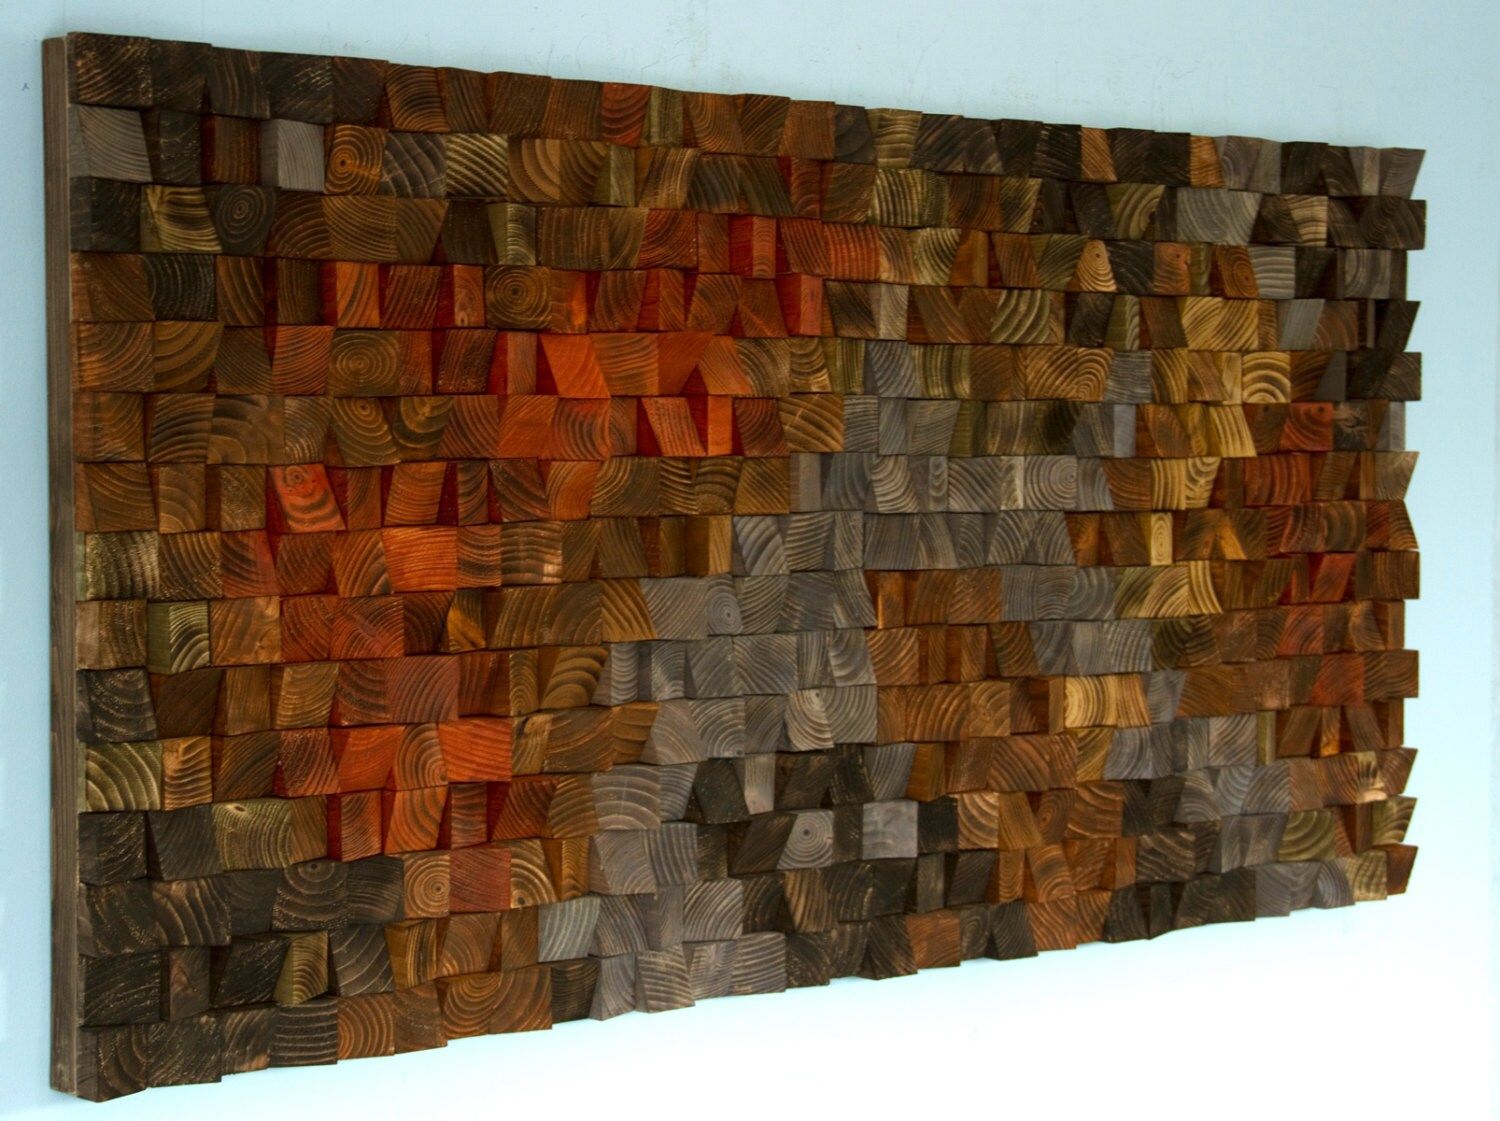 Rustic Wood Wall Art, Reclaimed Wood Wall Sculpture Throughout Abstract Flow Wood Wall Art (View 4 of 15)